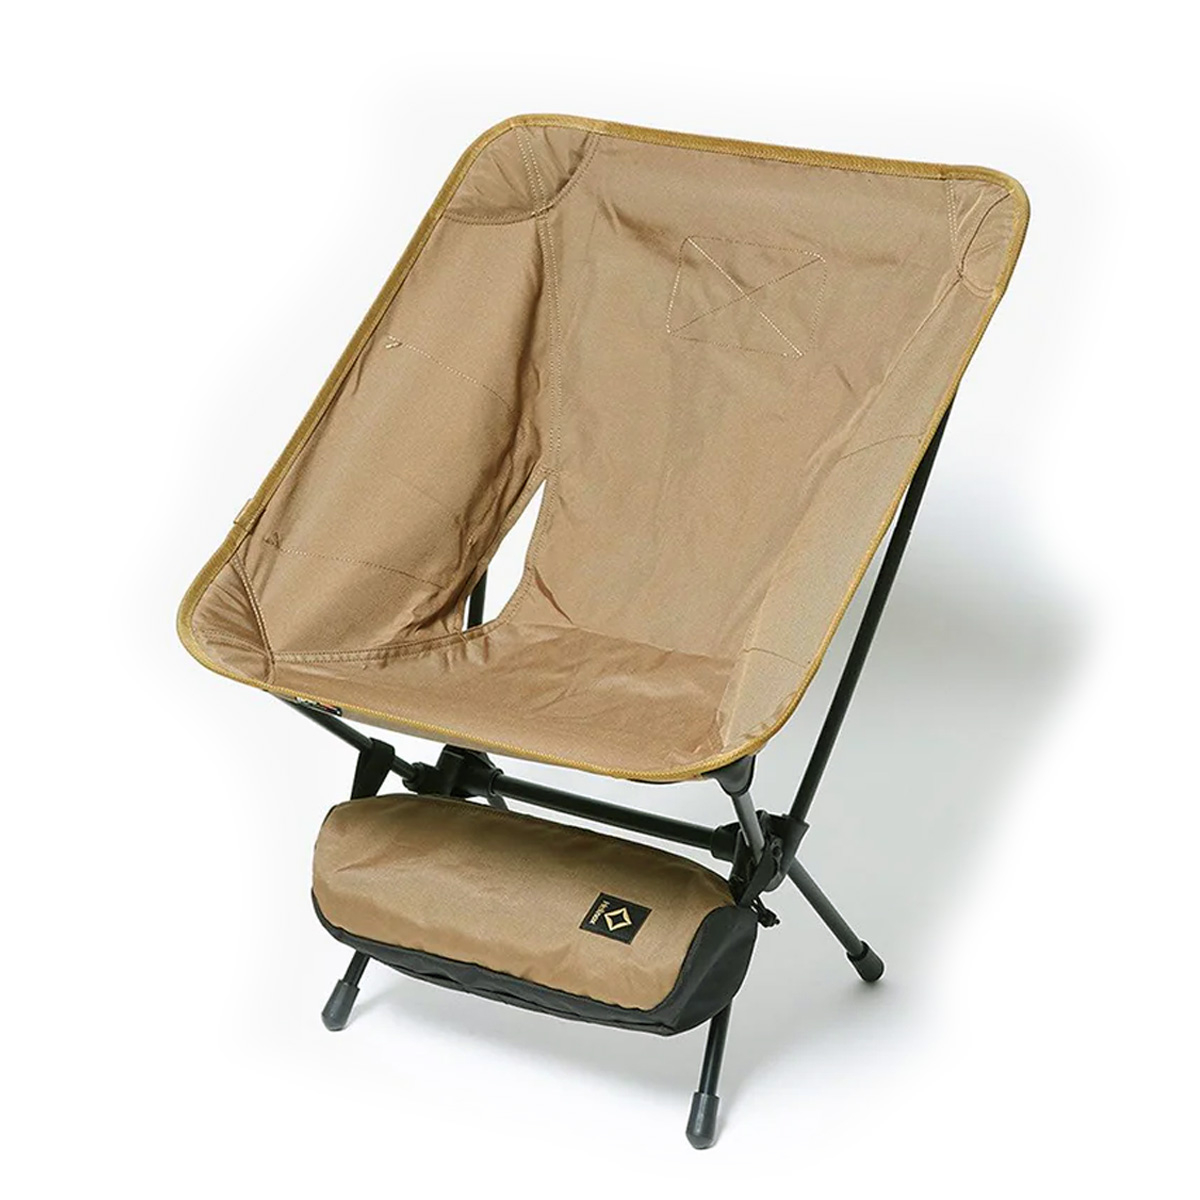 Helinox Tactical Chair One Coyote Tan, portable, lightweight chair